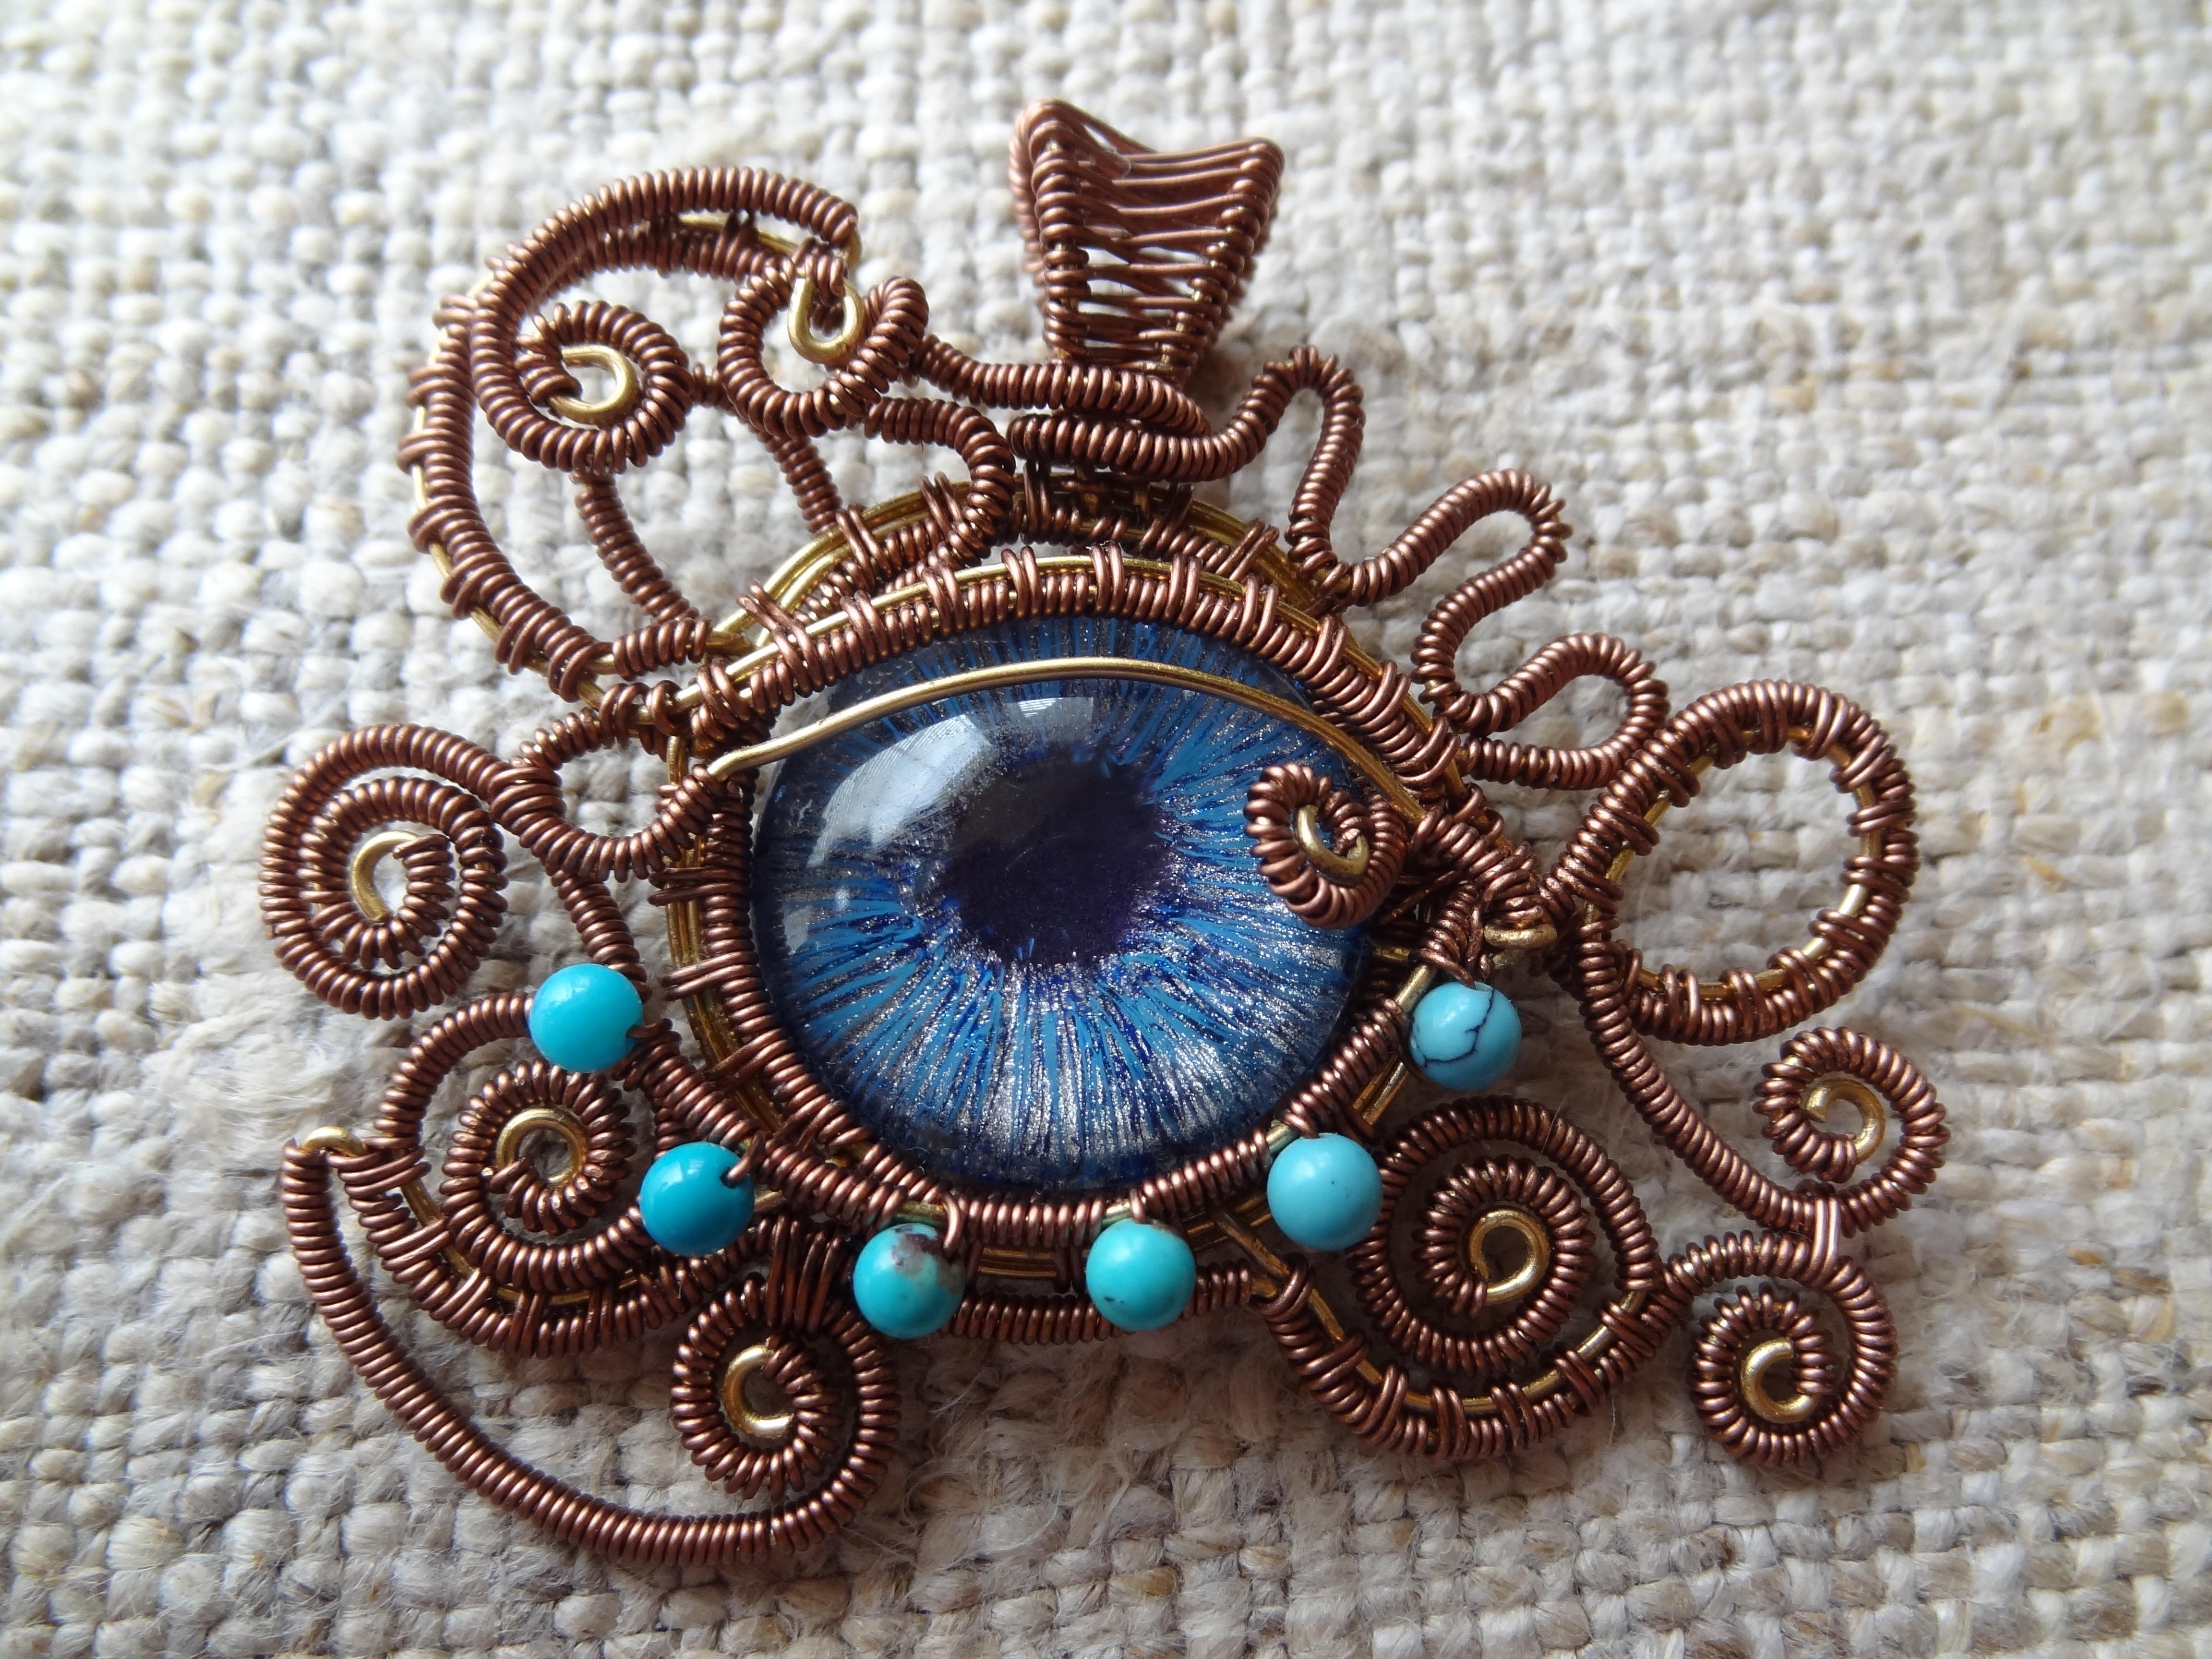 One of my resent works - All Seeing Eye Pendant Amulet - Evil Eye ...